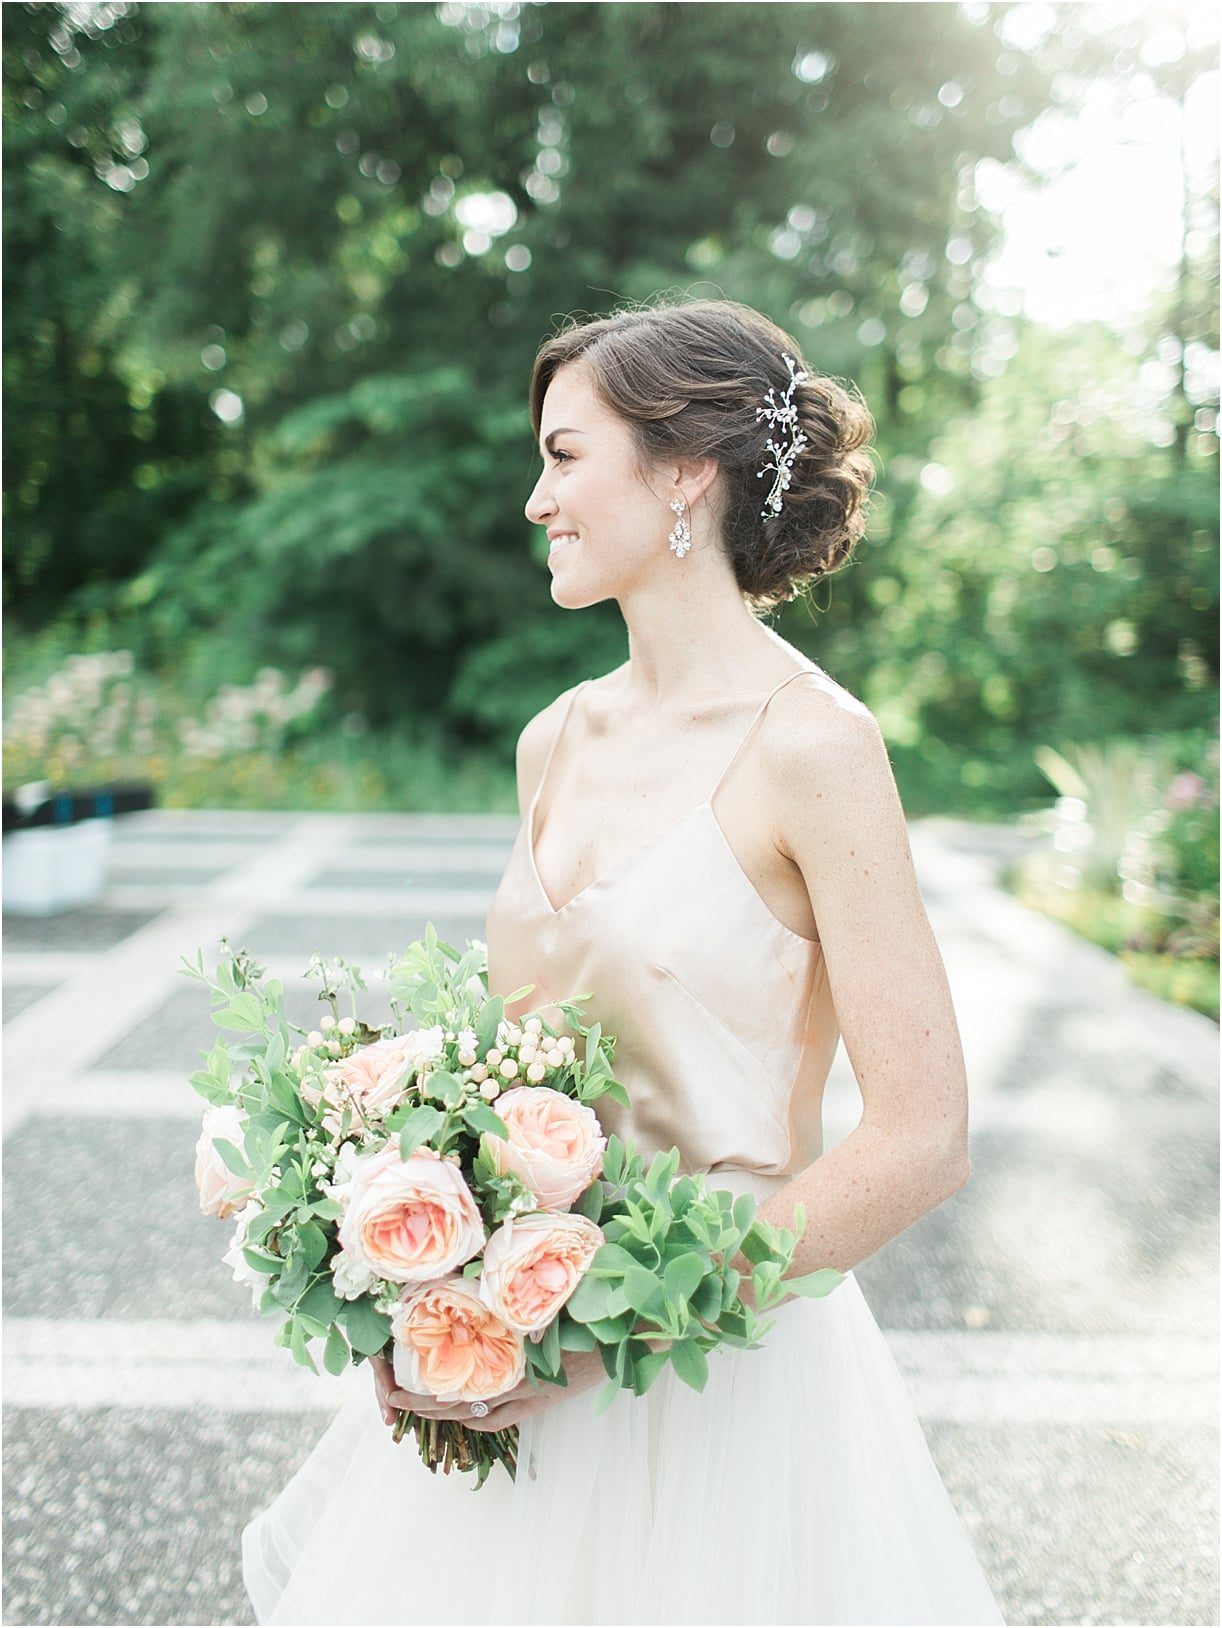 Peach Inspired Wedding Inspiration at the Arboretum English Roses Bouquet